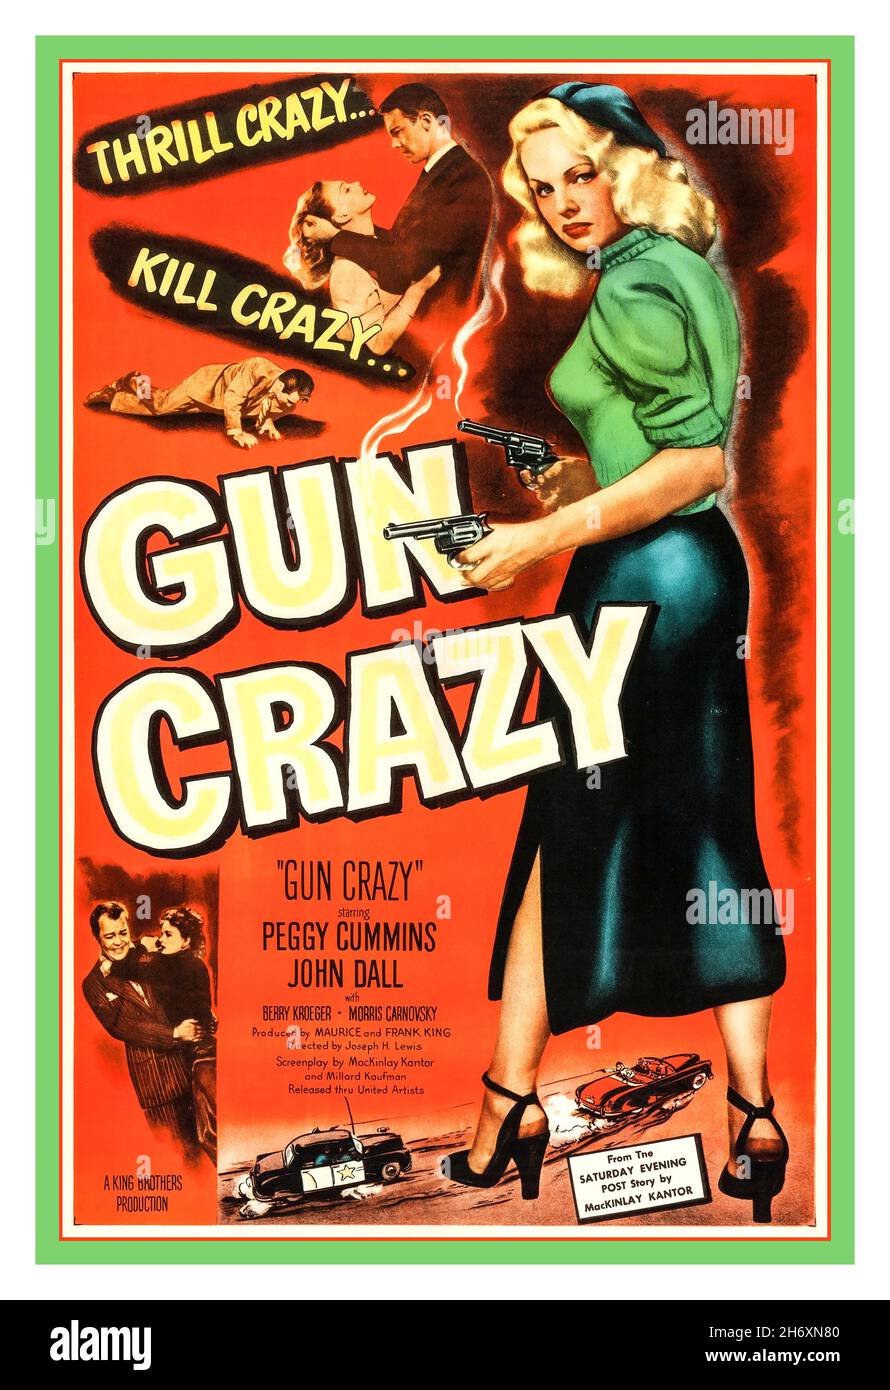 GUN CRAZY 1950s Vintage movie film poster 'Gun Crazy' (also known as Deadly Is the Female) ia 1950 American crime film noir starring Peggy Cummins and John Dall in a story about the crime-spree of a gun-toting husband and wife. It was directed by Joseph H. Lewis, and produced by Frank and Maurice King.The screenplay by blacklisted writer Dalton Trumbo—credited to Millard Kaufman because of the blacklist—and by MacKinlay Kantor was based upon a short story by Kantor. In 1998, Gun Crazy was selected for preservation in the United States National Film Registry Stock Photo